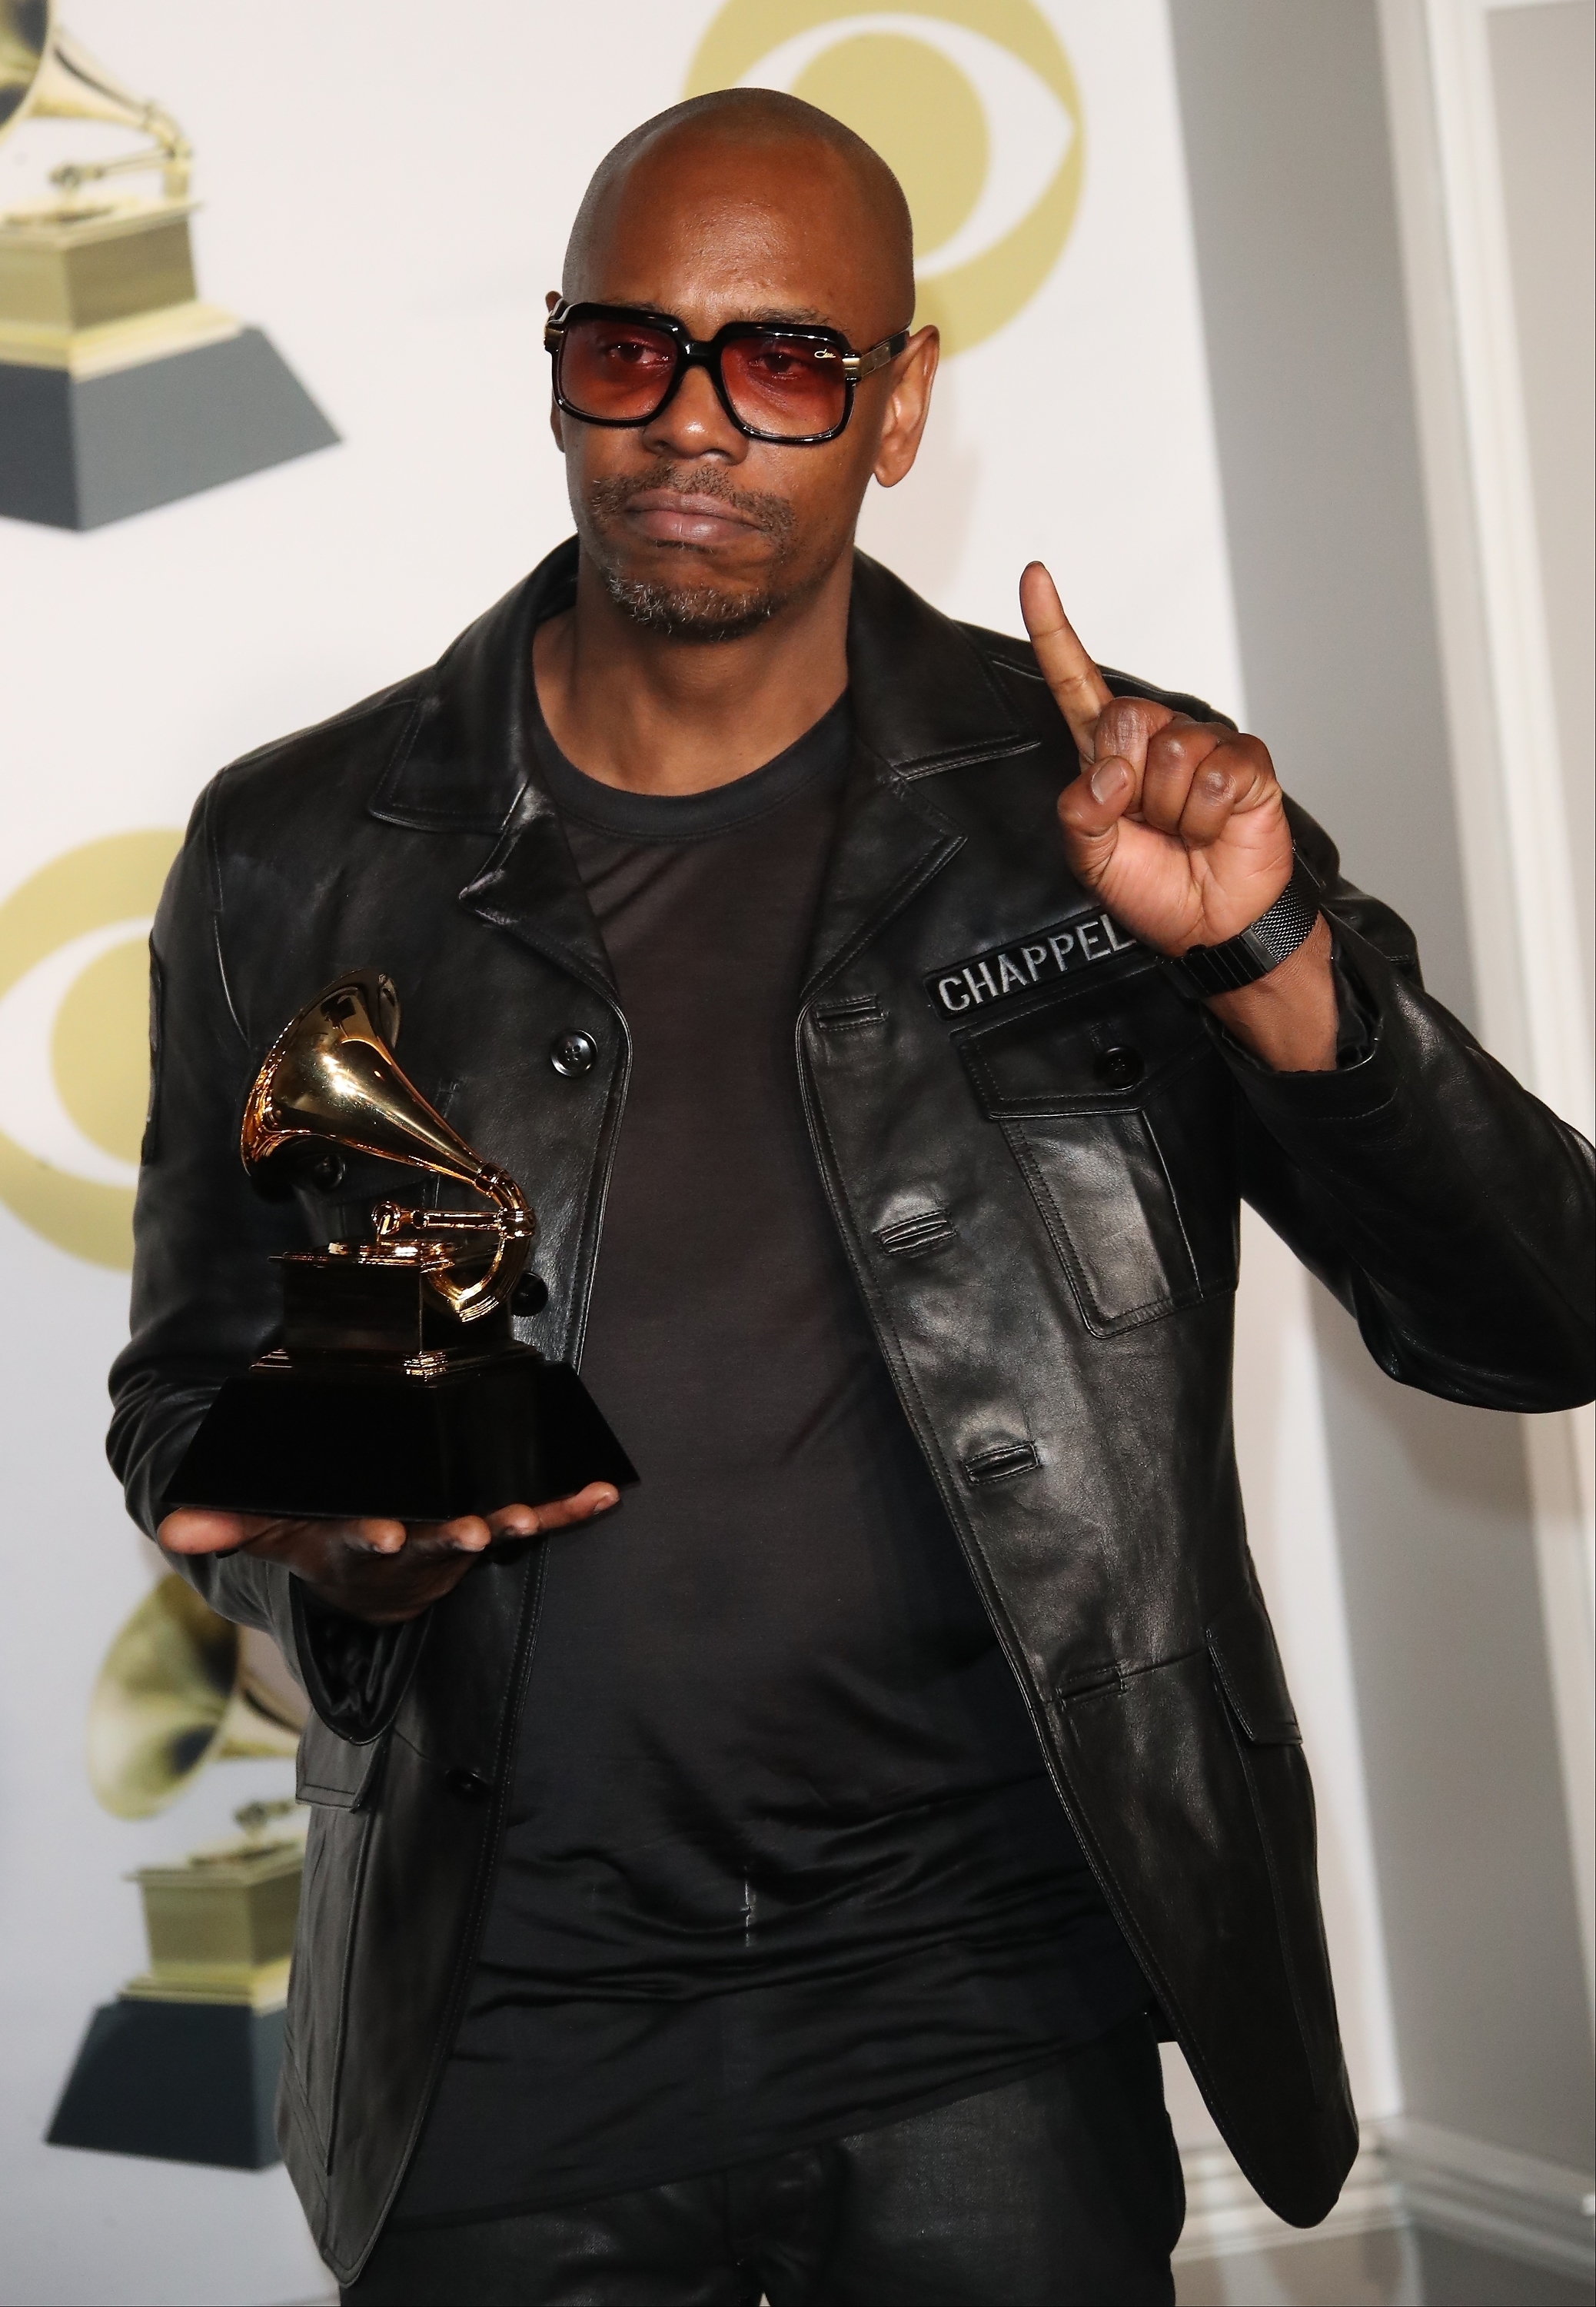 Dave Chappelle in a black leather jacket, holding a Grammy award and posing with one finger raised